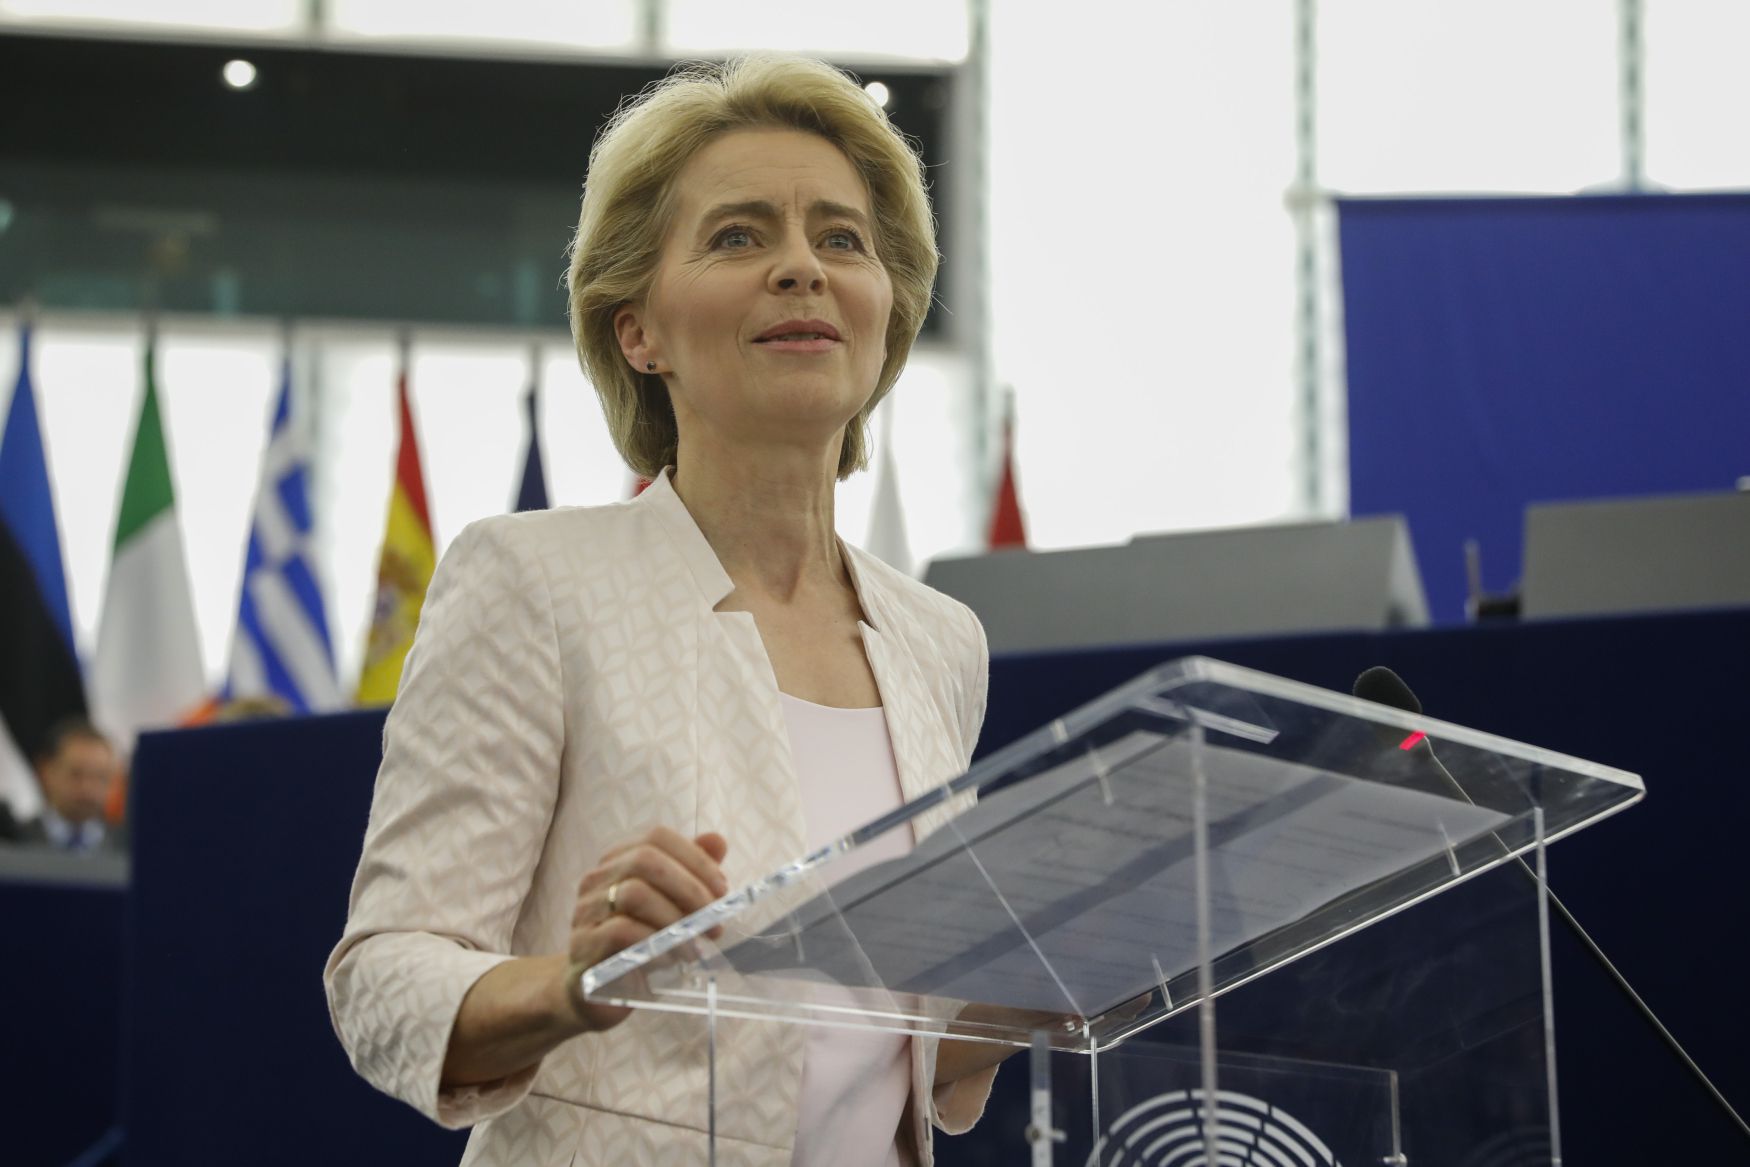 Ursula von der Leyen’s election greeted with mixed feelings Radio